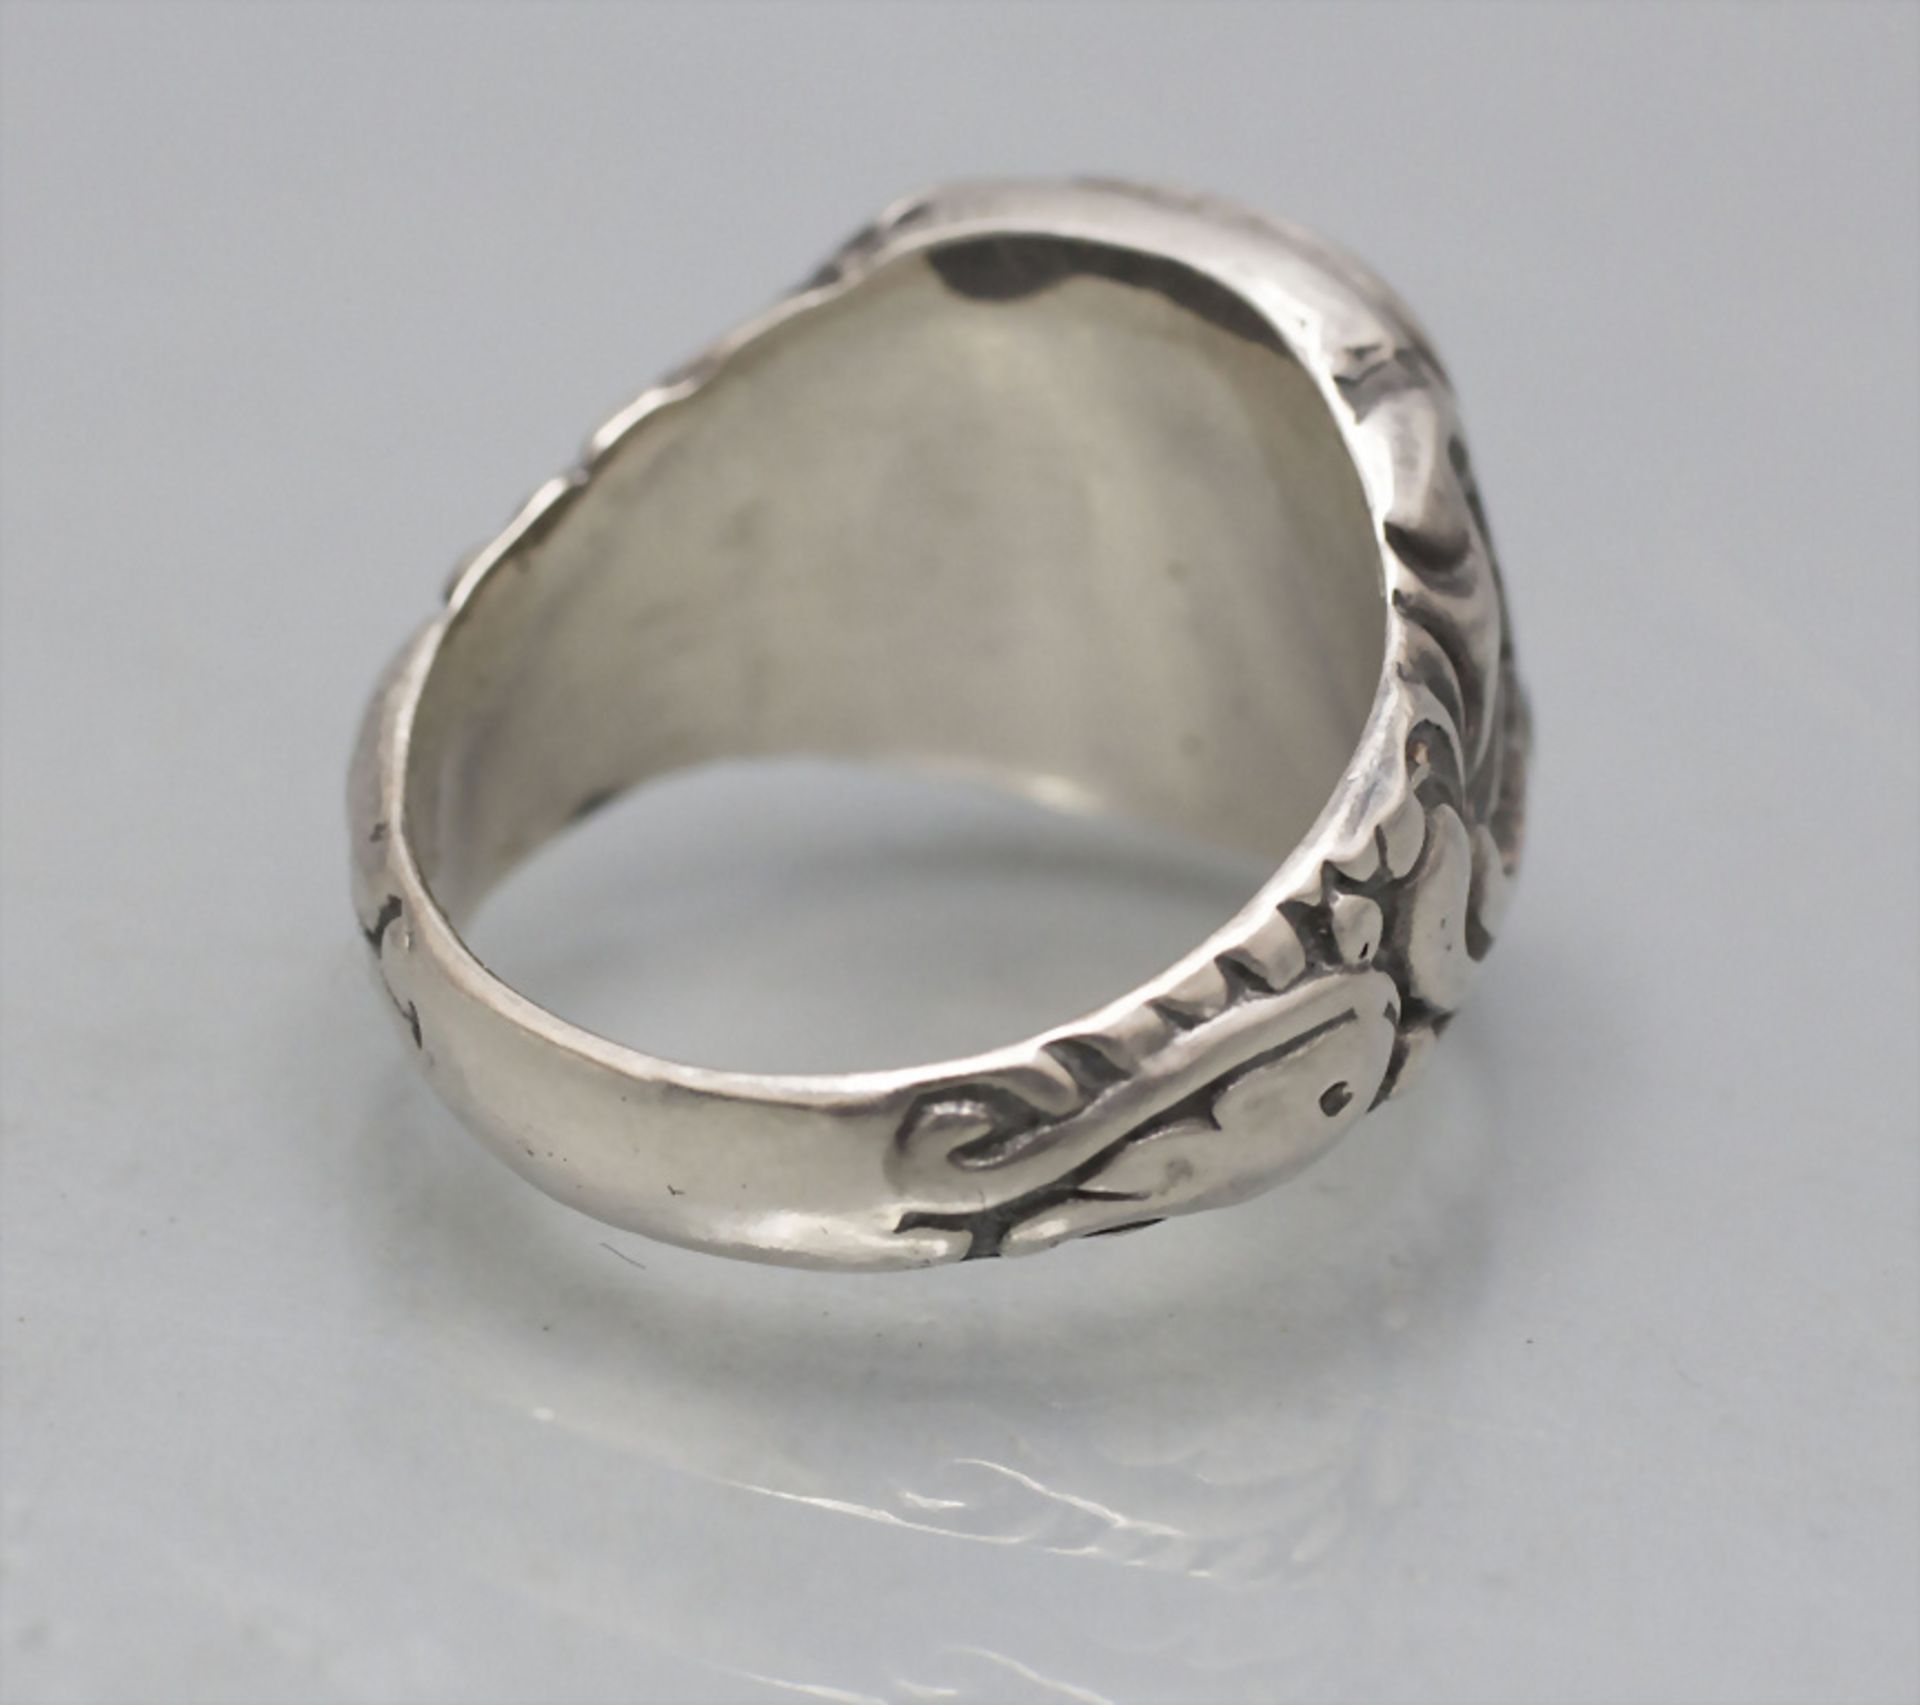 Siegelring / A silver seal ring, 20. Jh. - Image 3 of 3